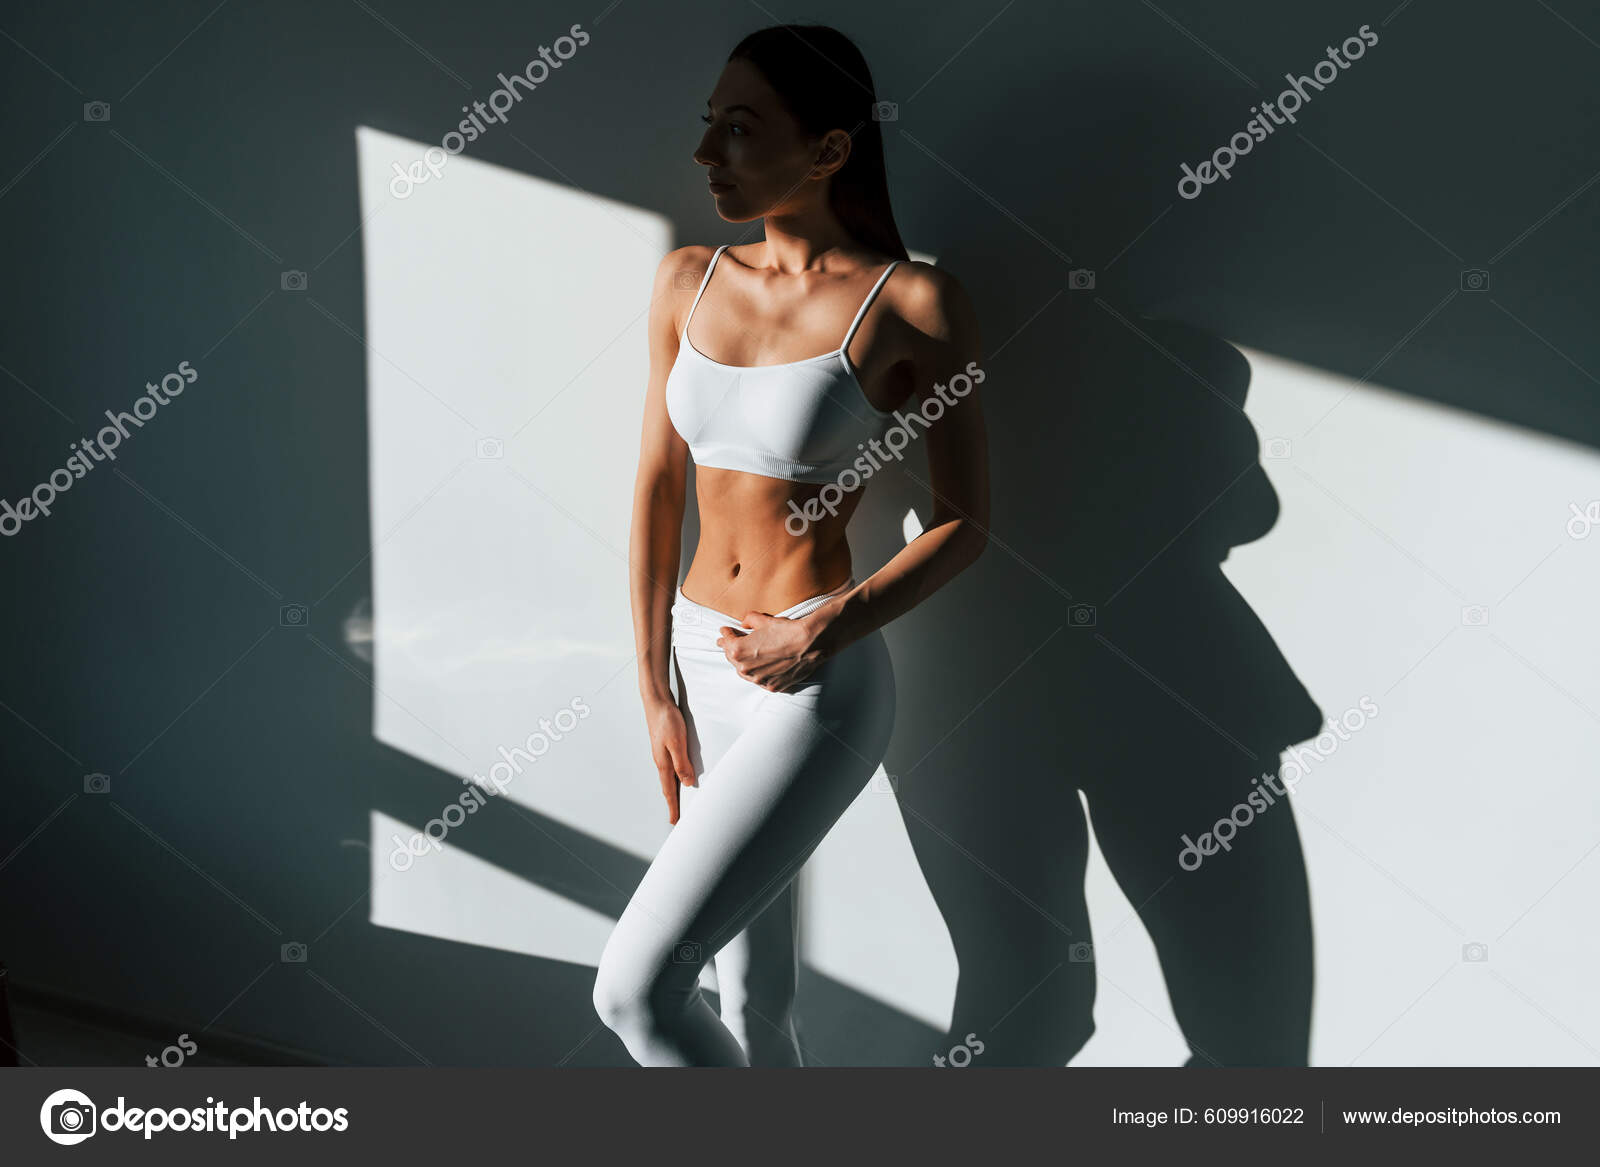 Sports women of different body types stand side by side, wearing